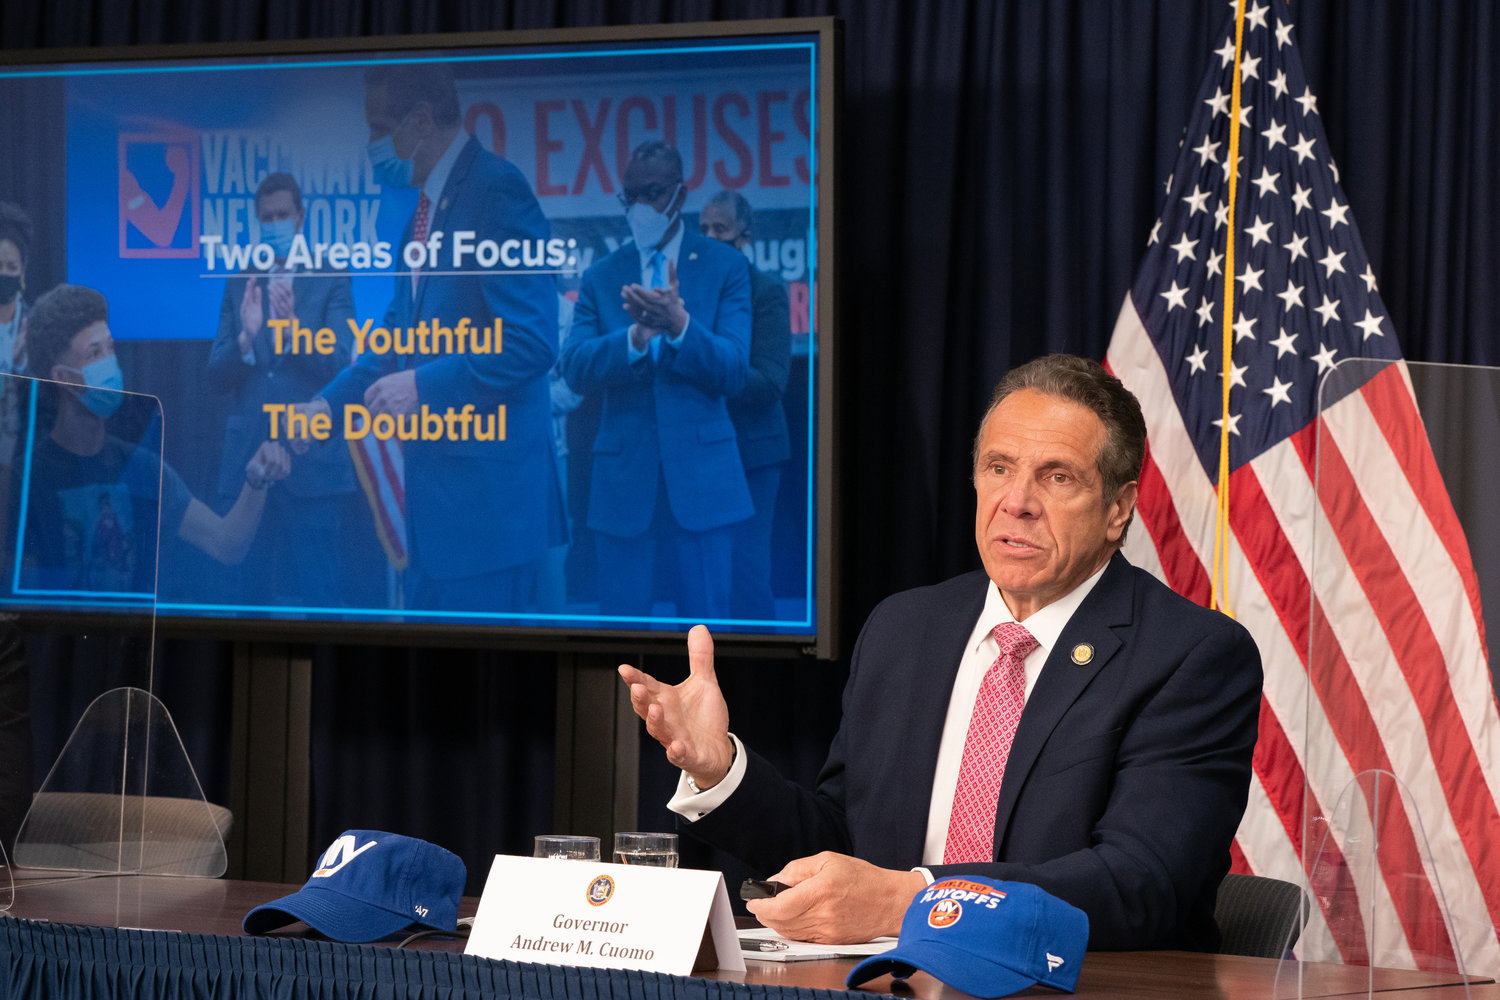 Gov. Andrew Cuomo announced last week that all CUNY and SUNY students would need to be vaccinated against the virus that causes COVID-19 if they wanted to attend classes on campus next semester. He also encouraged the state’s private colleges to do the same.